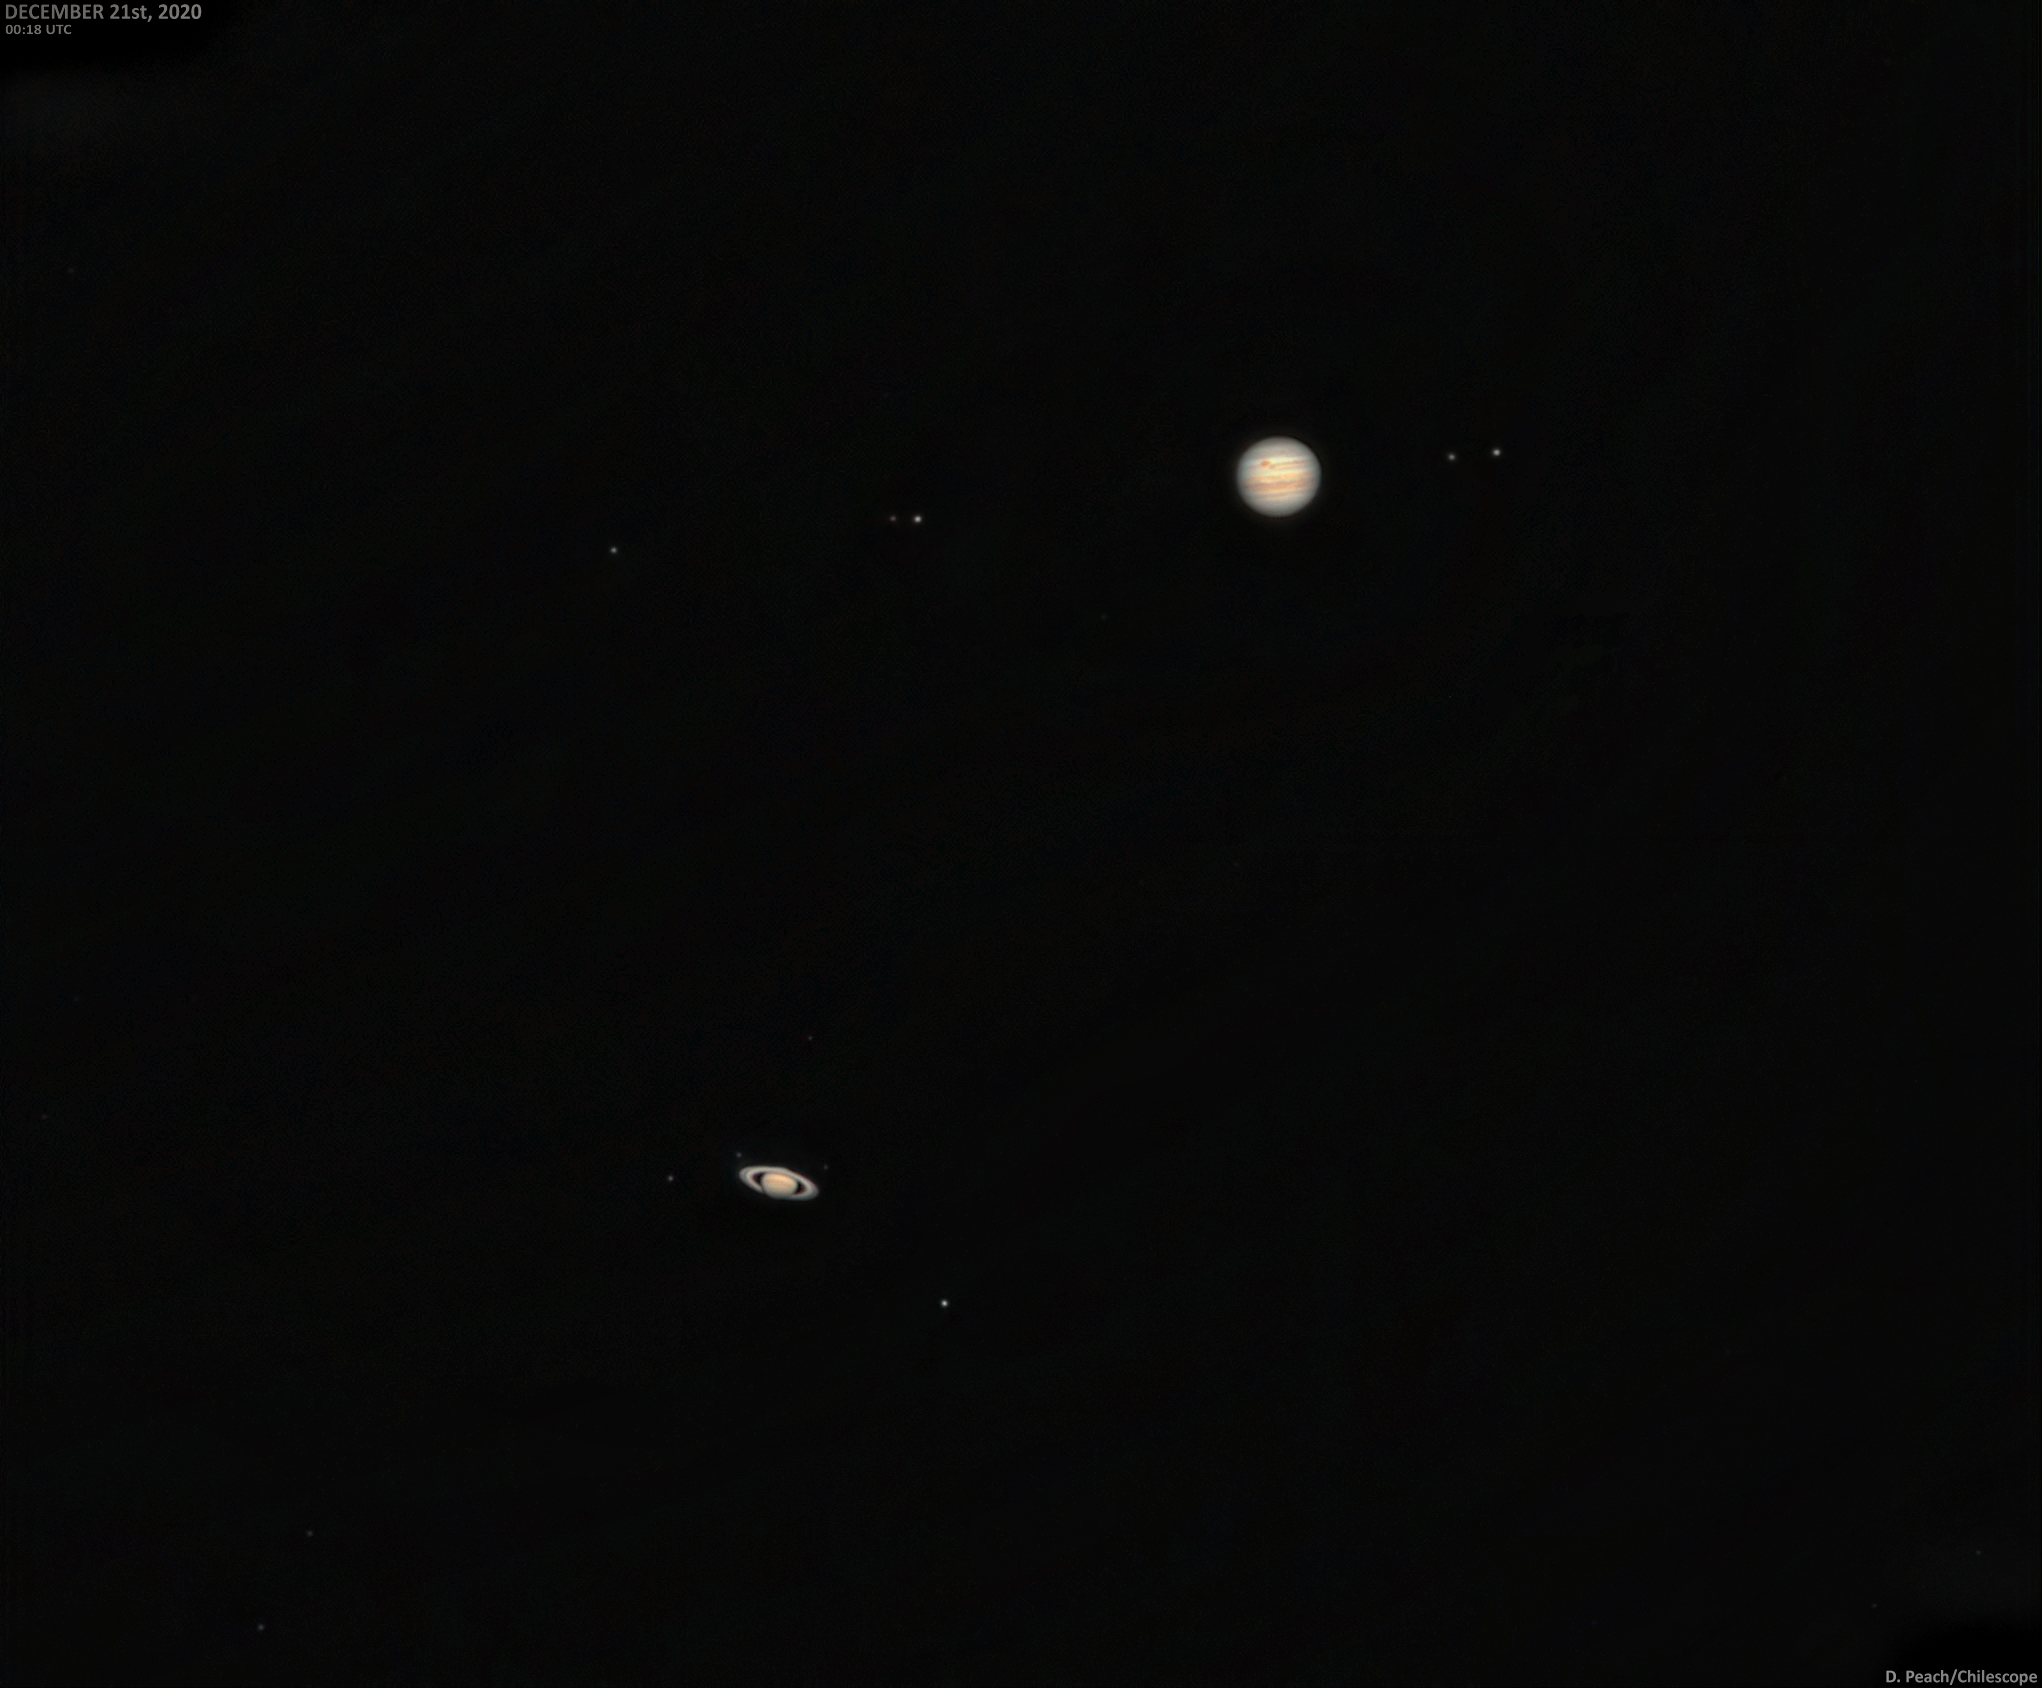 apod-2020-december-23-jupiter-meets-saturn-a-red-spotted-great-conjunction